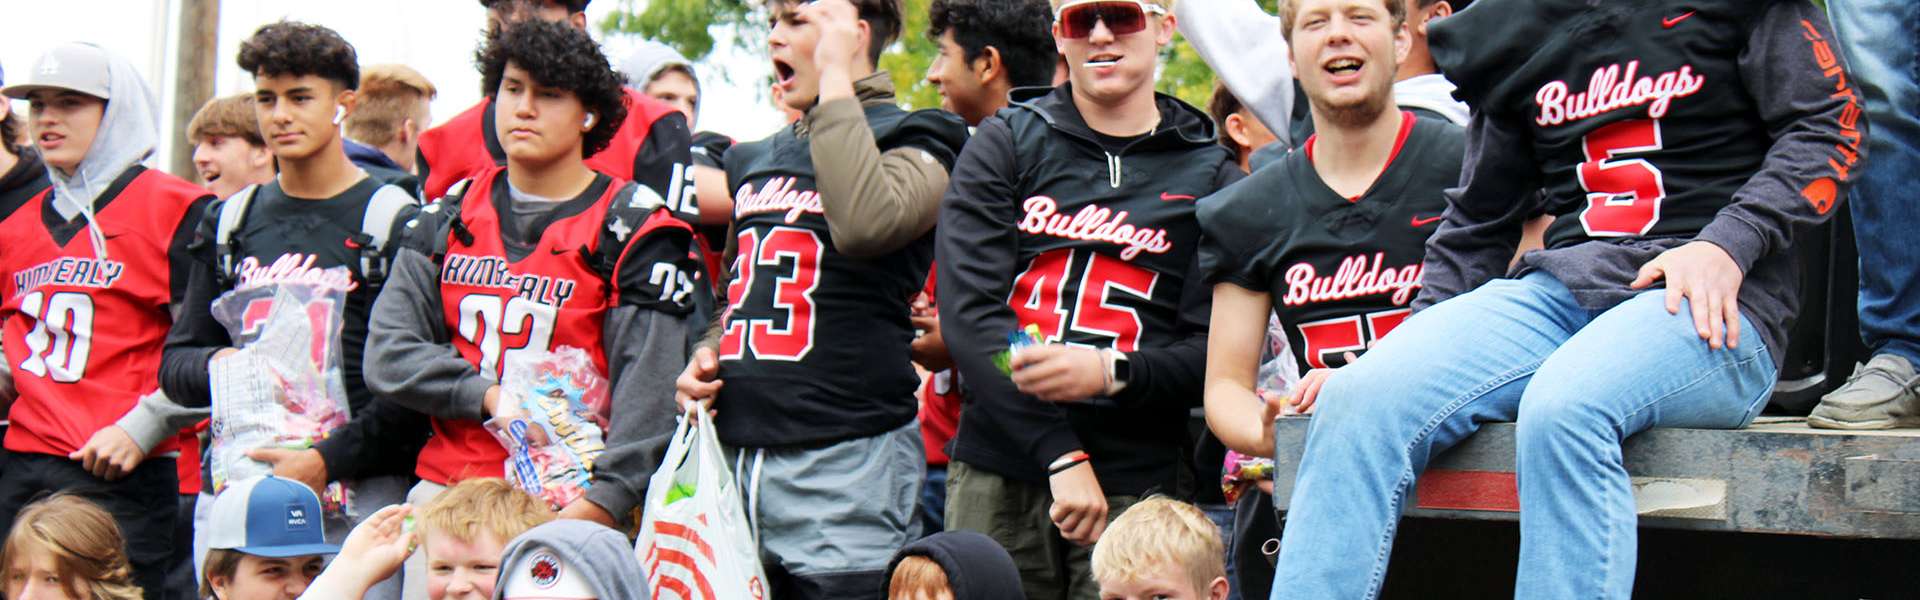 Members of the varsity football team celebrate during the parade on Friday, Sept. 22. | Photo by Jacey Cypriano